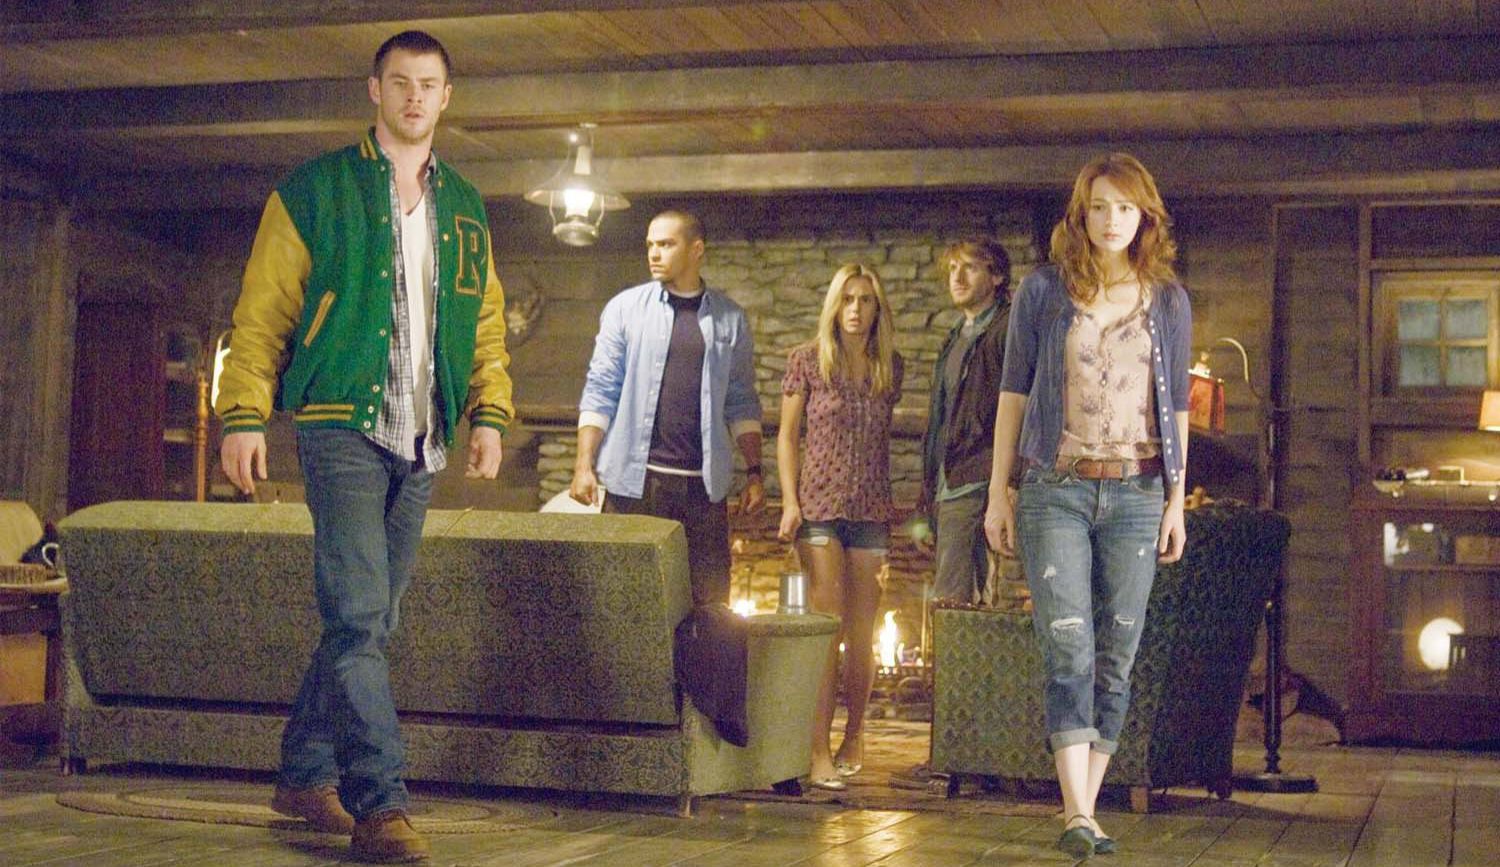 The Cabin in the Woods Cast image